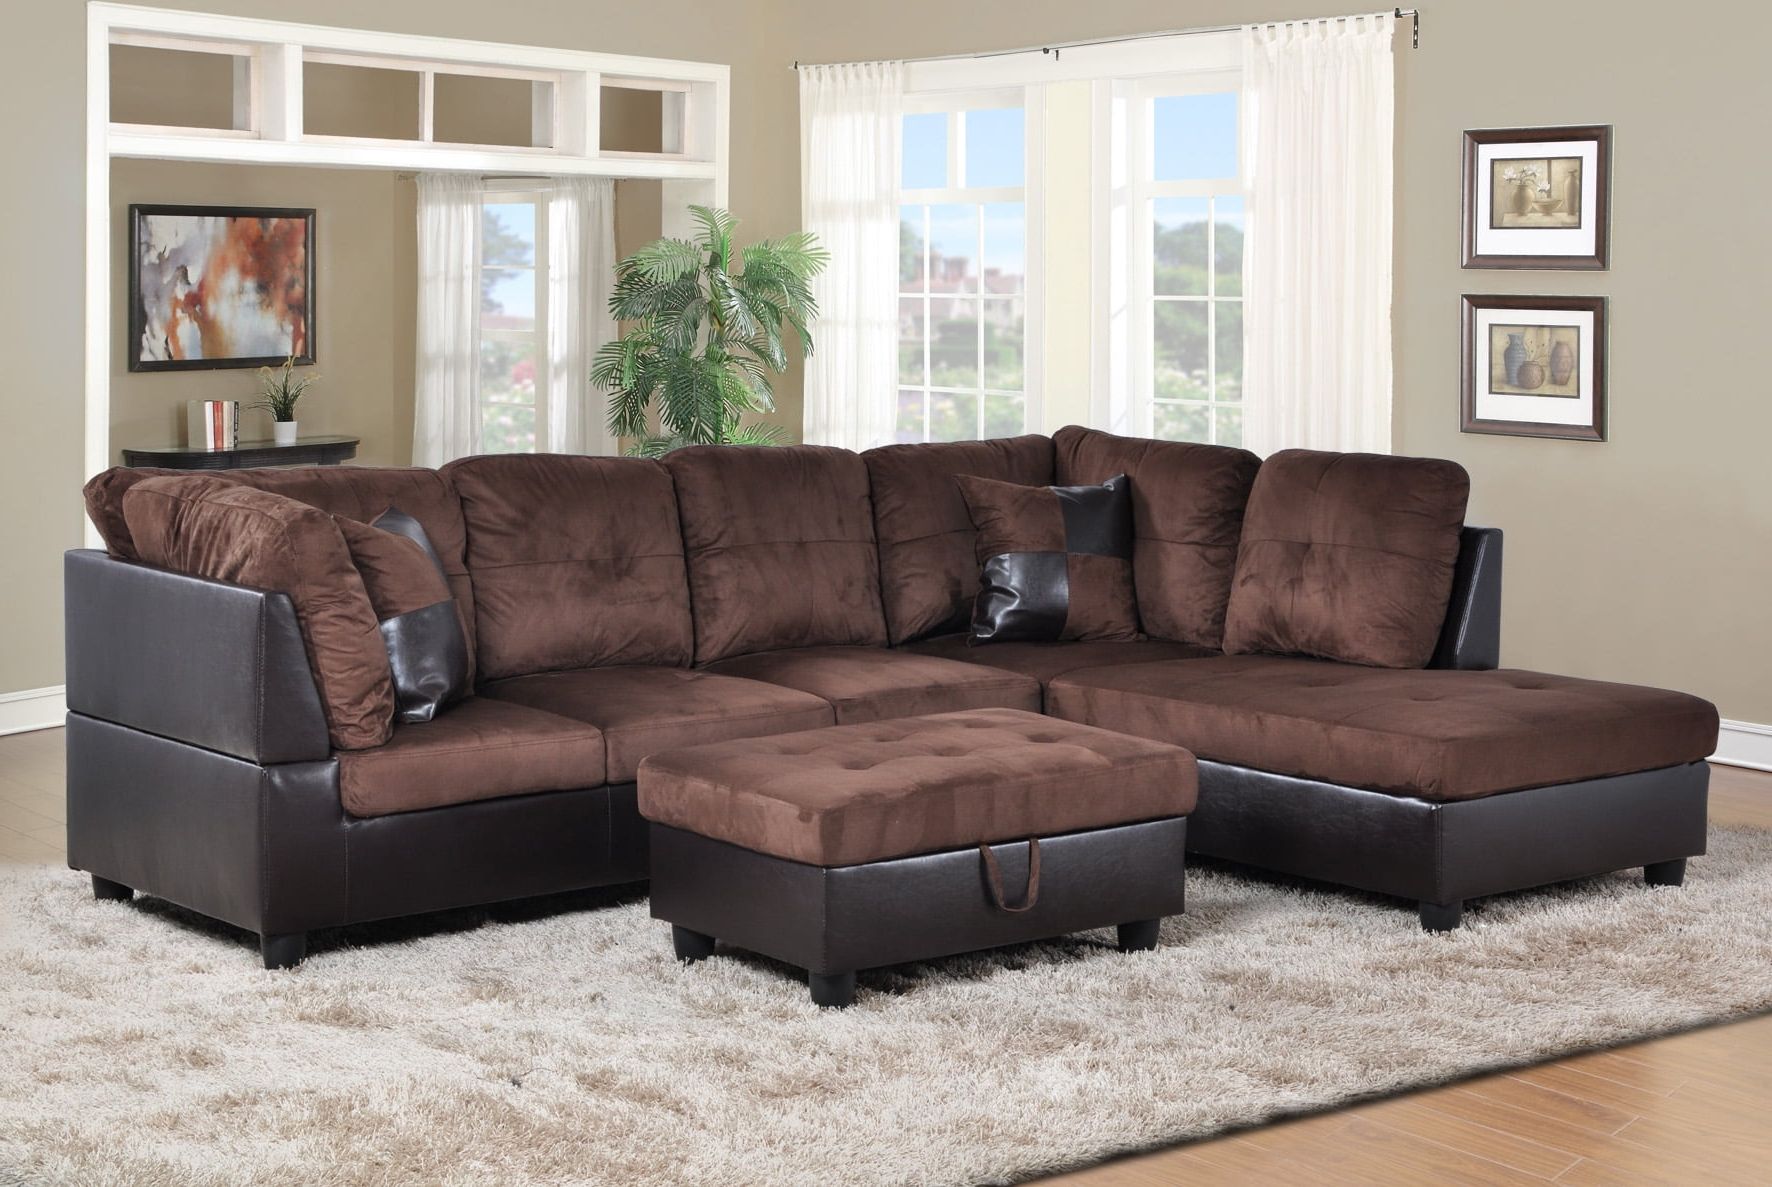 Ponliving Furniture Hermann Left Chaise Sectional Sofa With Storage Within Trendy Sofas In Chocolate Brown (View 12 of 15)